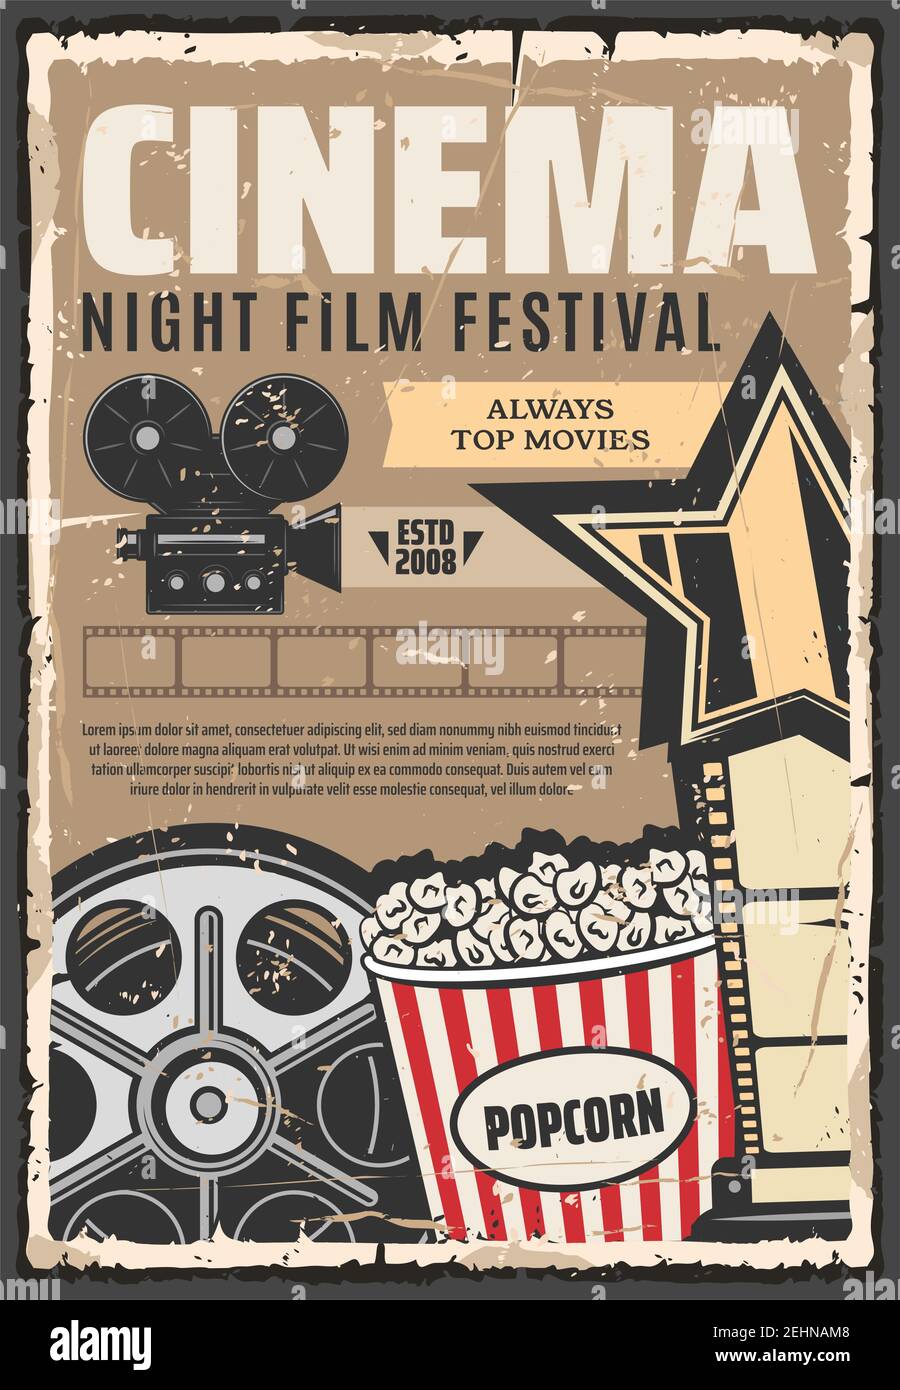 Cinema night film festival retro advertisement poster. Vector vintage design of cinematography camera with movie star award and popcorn snack for prem Stock Vector